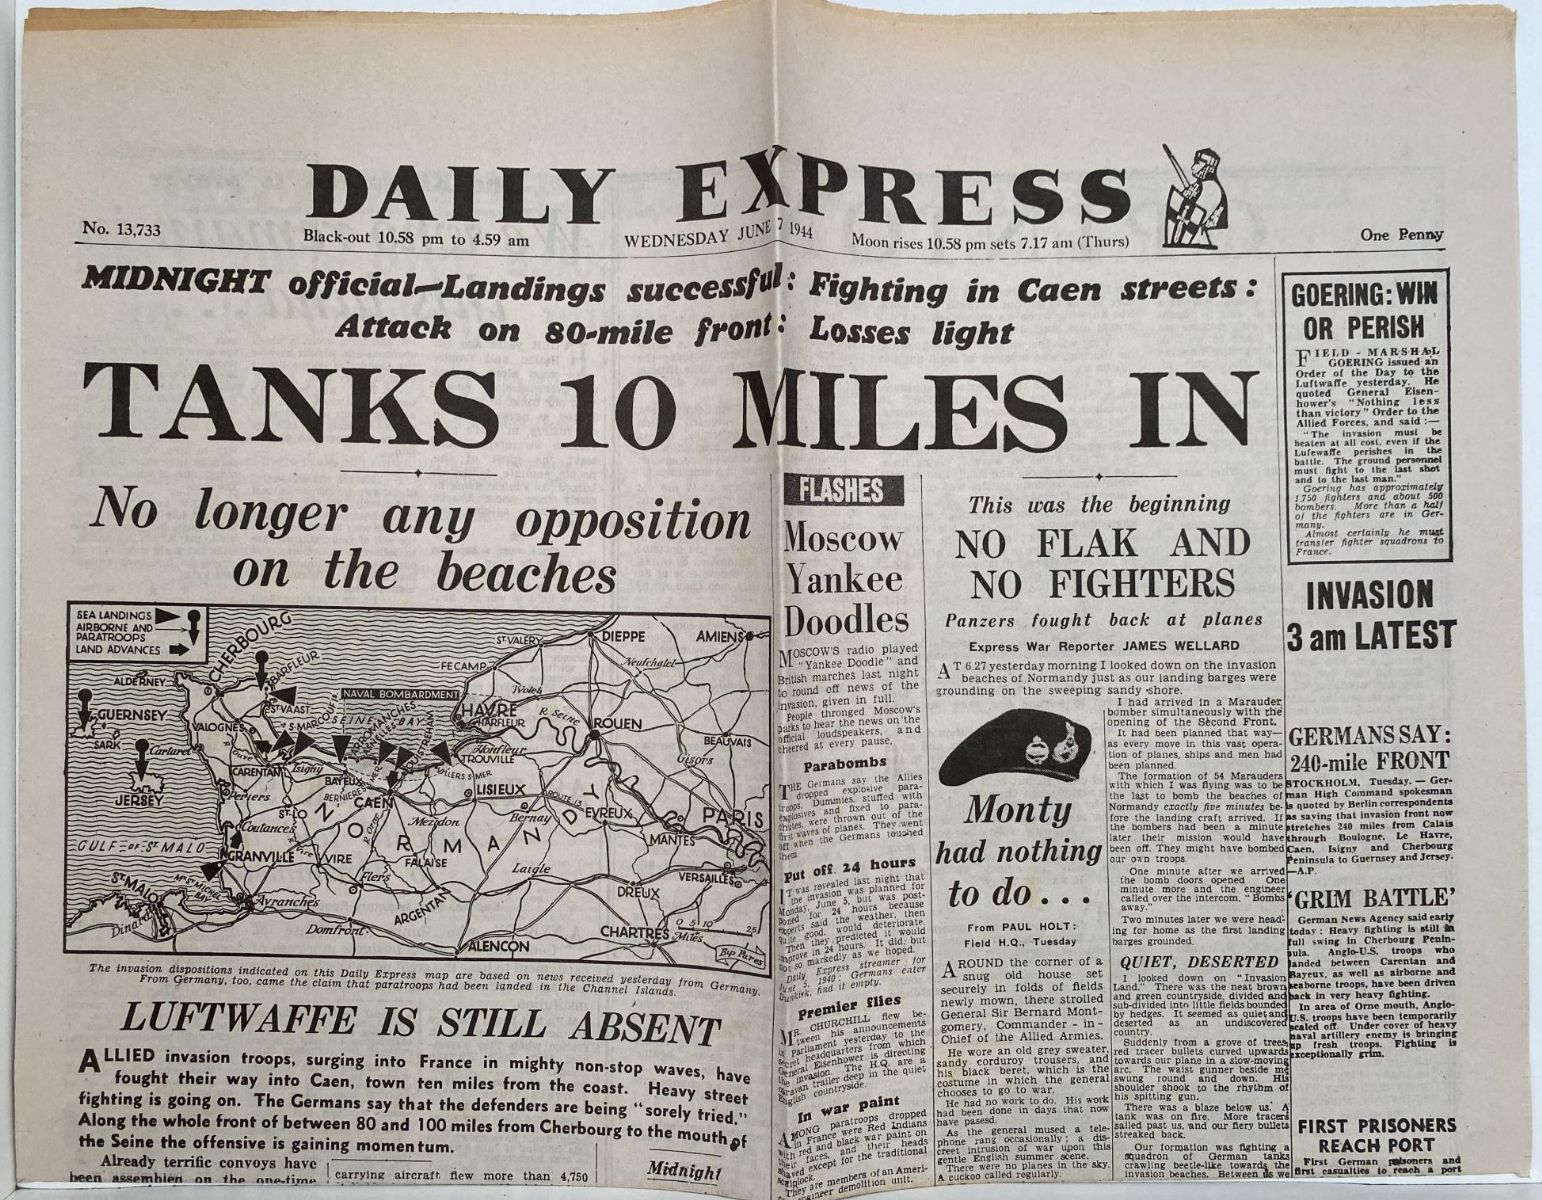 OLD WARTIME NEWSPAPER: Daily Express, Wednesday 7th June 1944